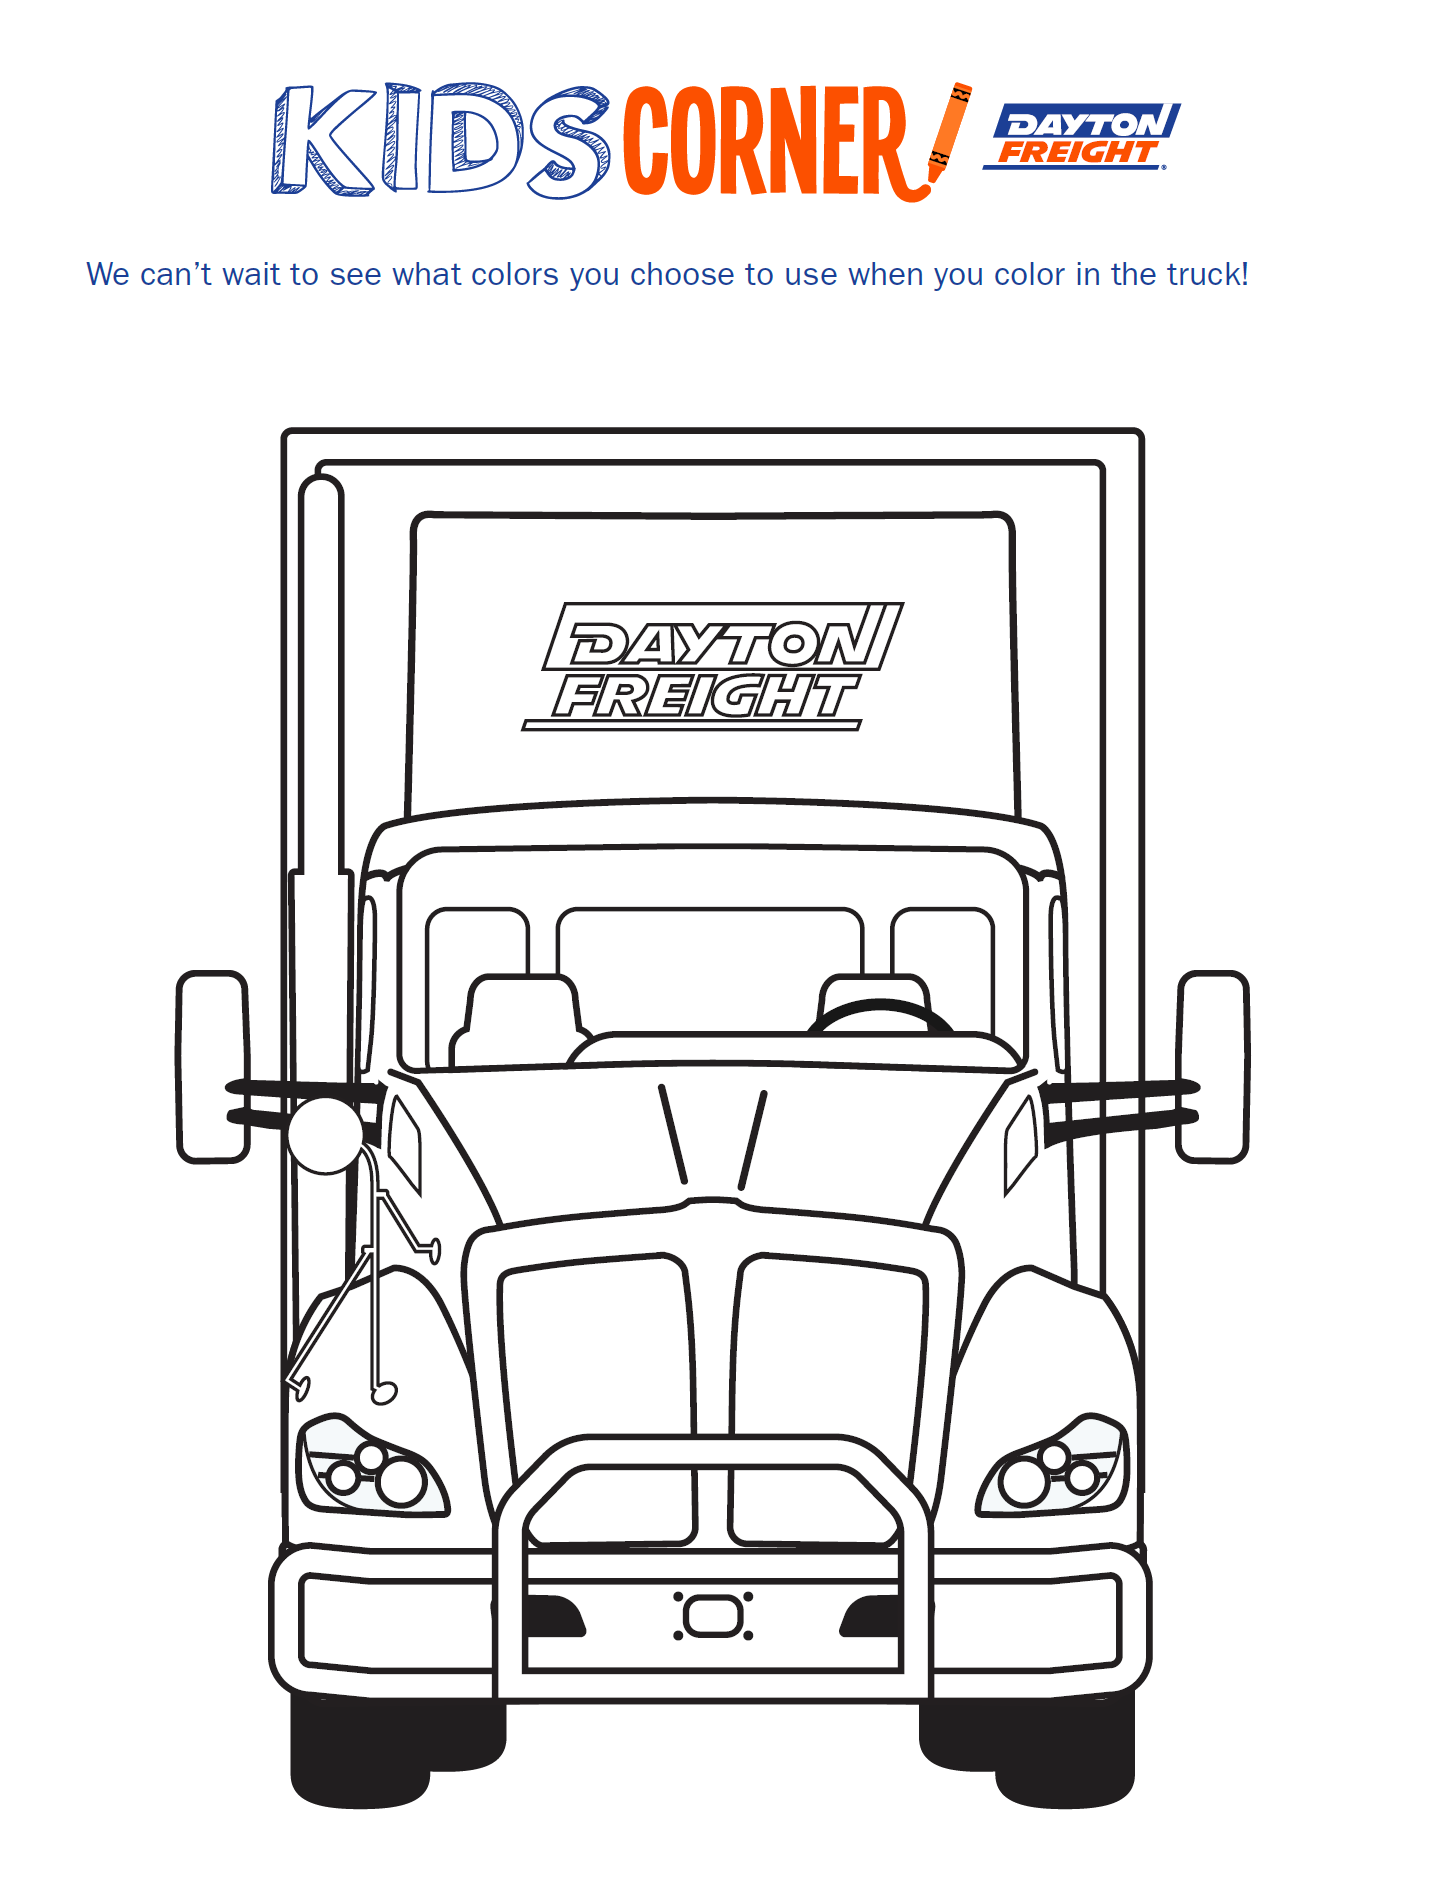 Truck Coloring Page